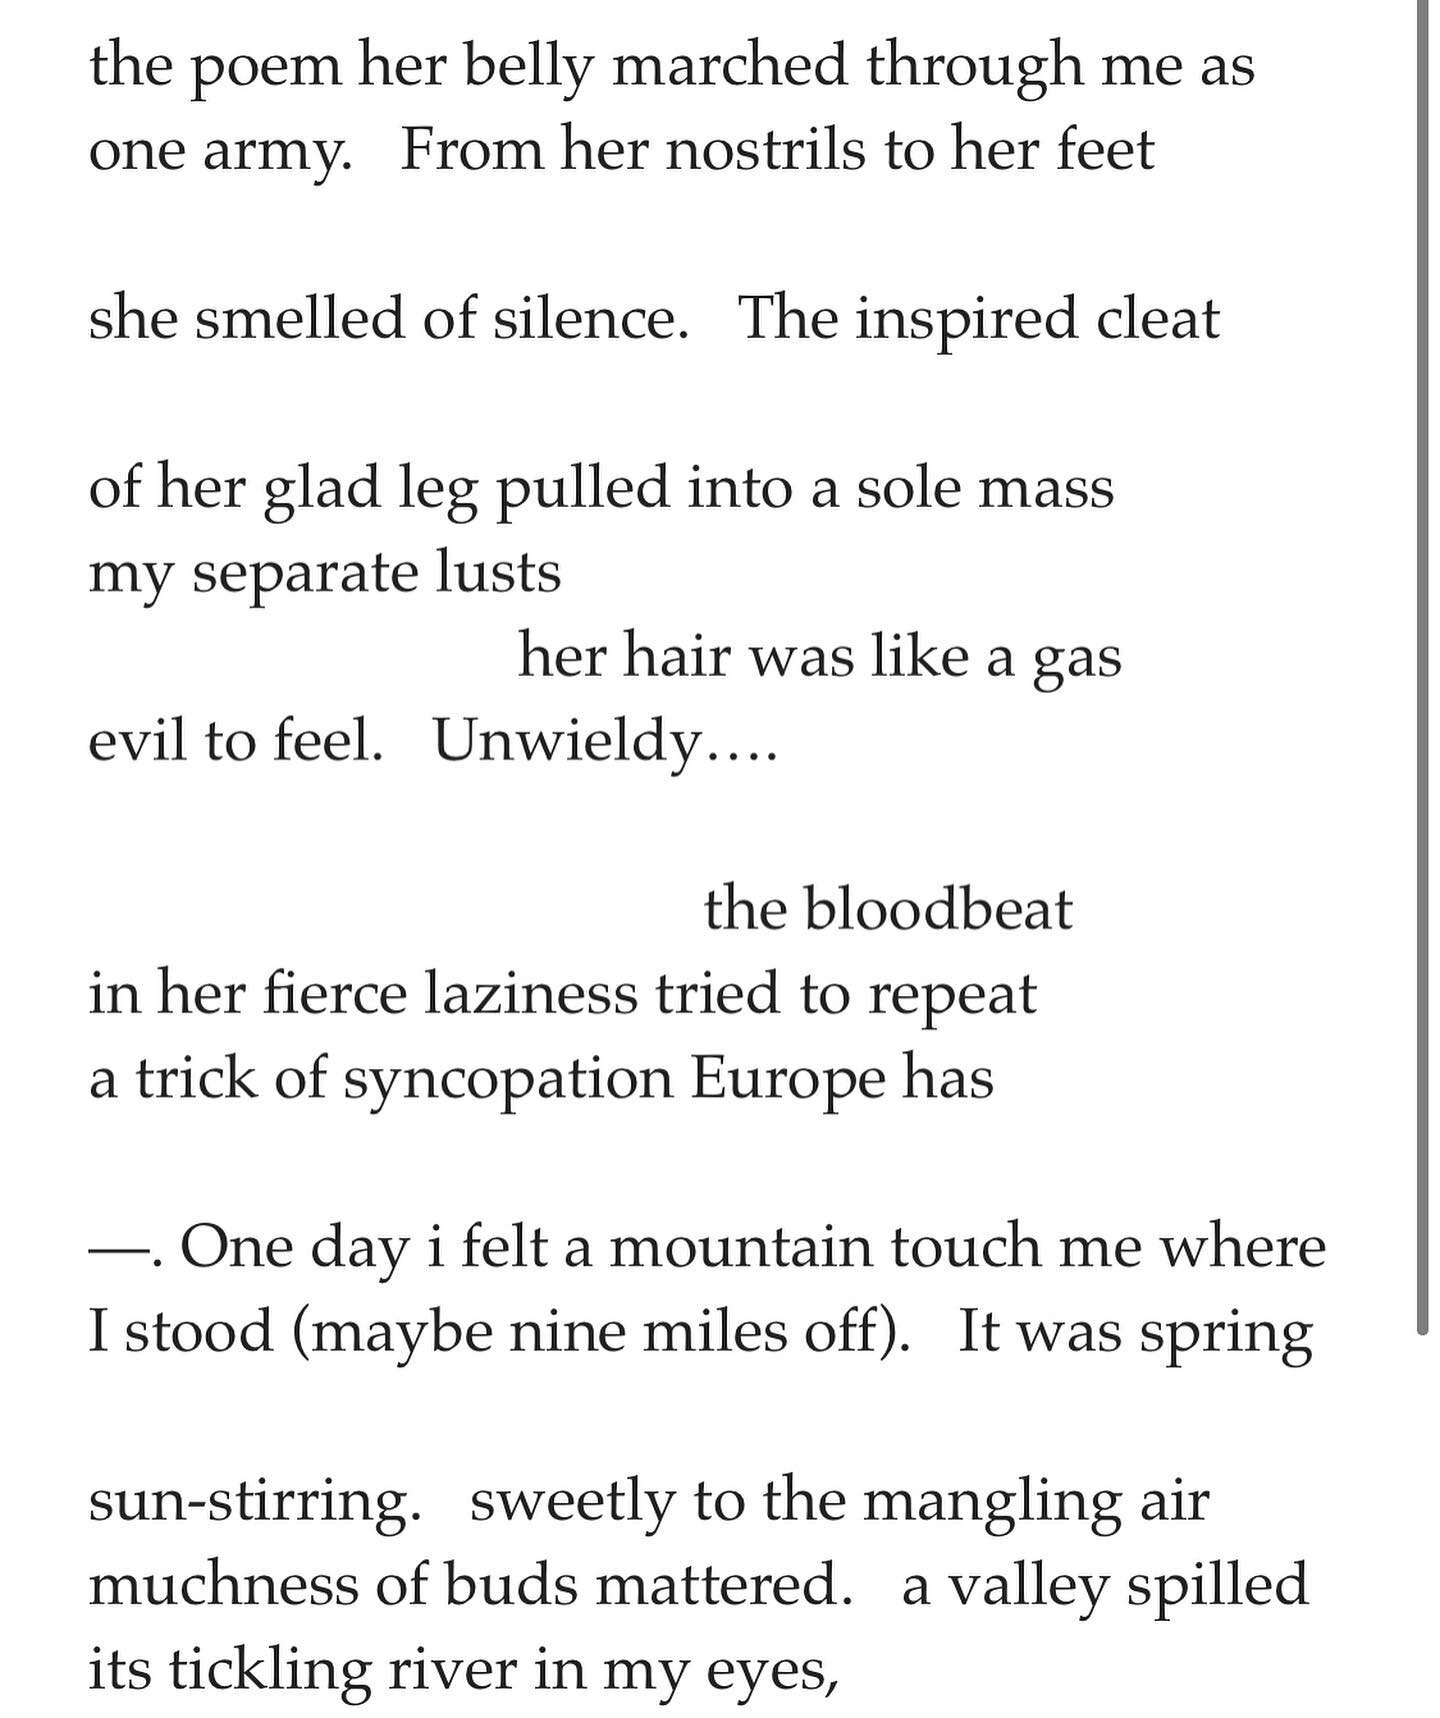 April is #nationalpoetrymonth ! Here&rsquo;s one of my favorites, &ldquo;the poem her belly marched through me as one army&rdquo; by e. e. cummings. Unfortunately the last line wouldn&rsquo;t fit on the post; I put the link in my bio for those who wa